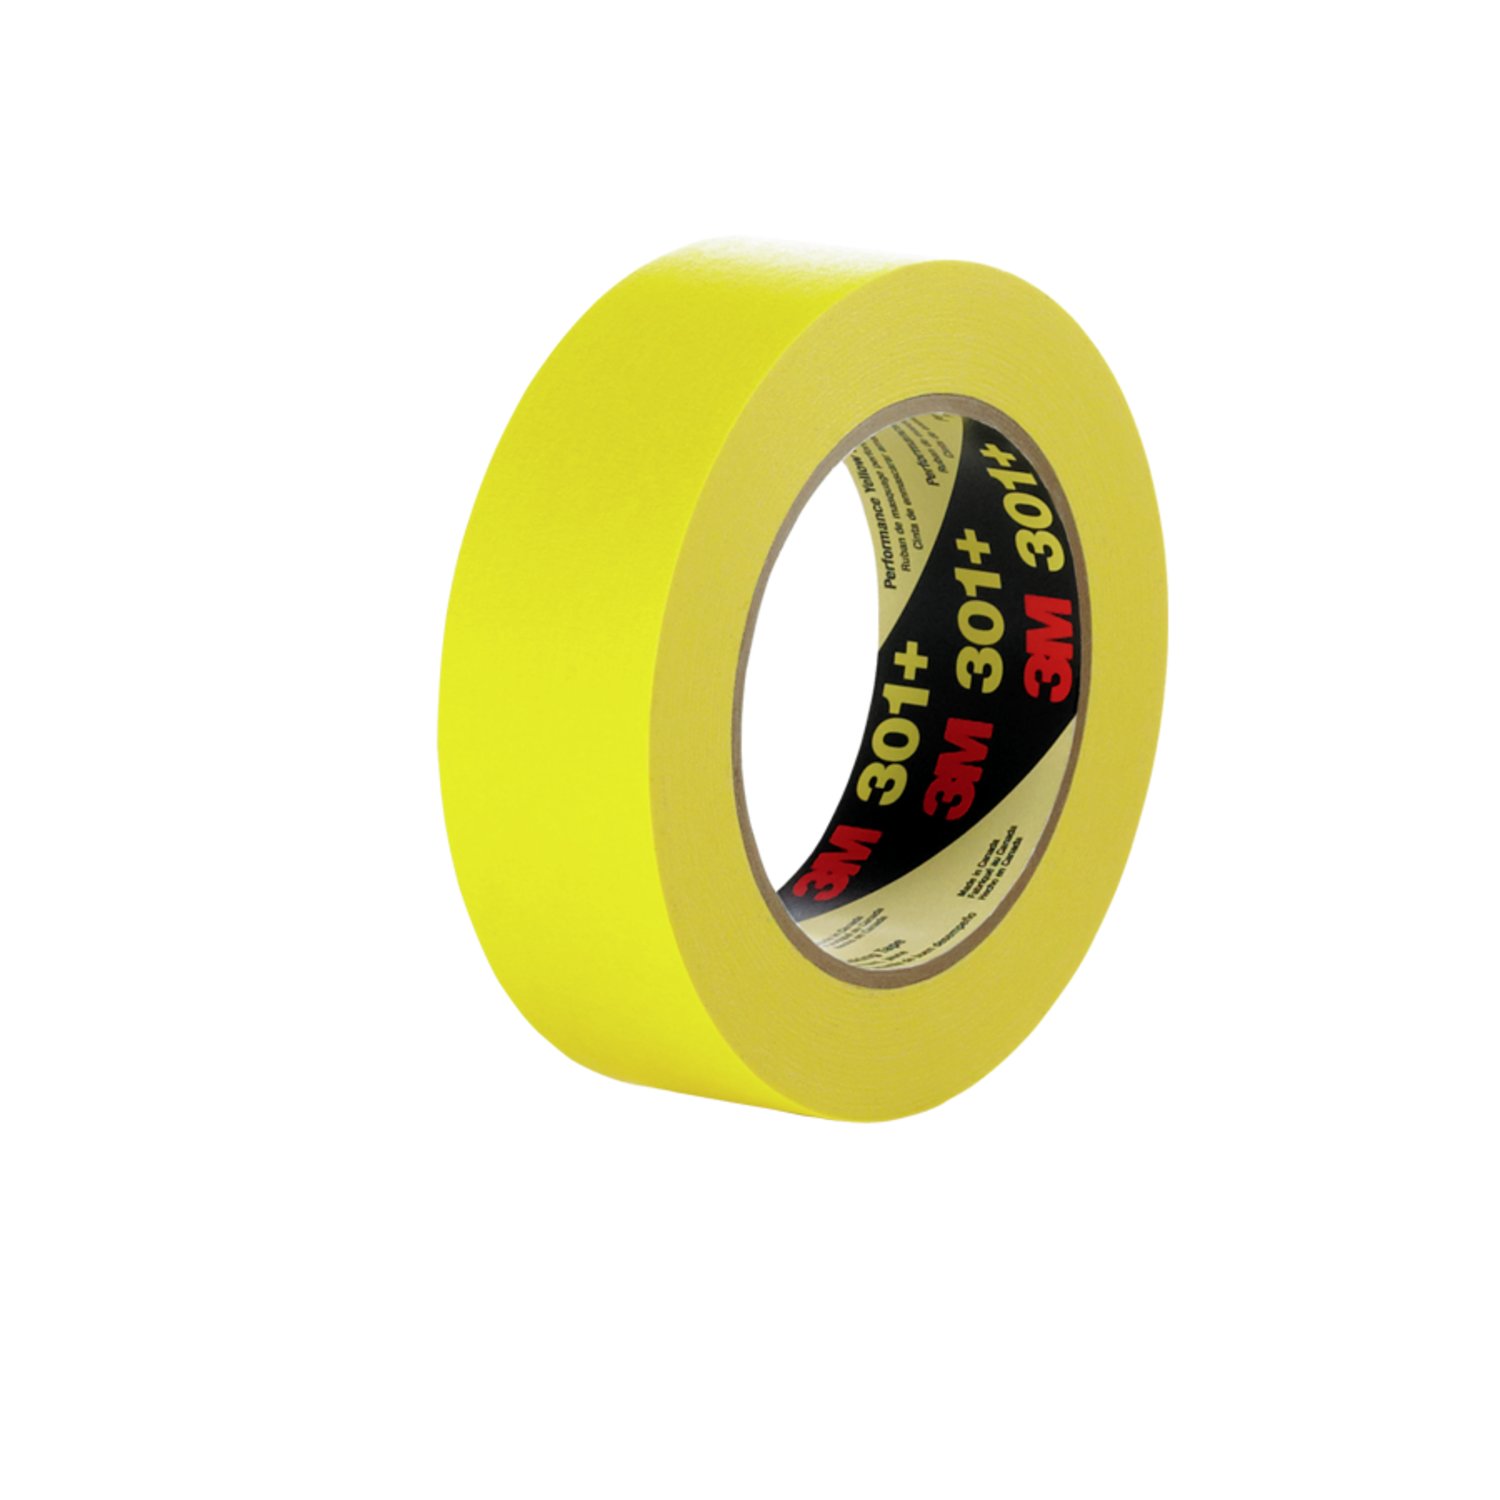 7000148421 - 3M Performance Yellow Masking Tape 301+, 48 mm x 55 m, 24 Roll/Case,
Individually Wrapped Conveniently Packaged